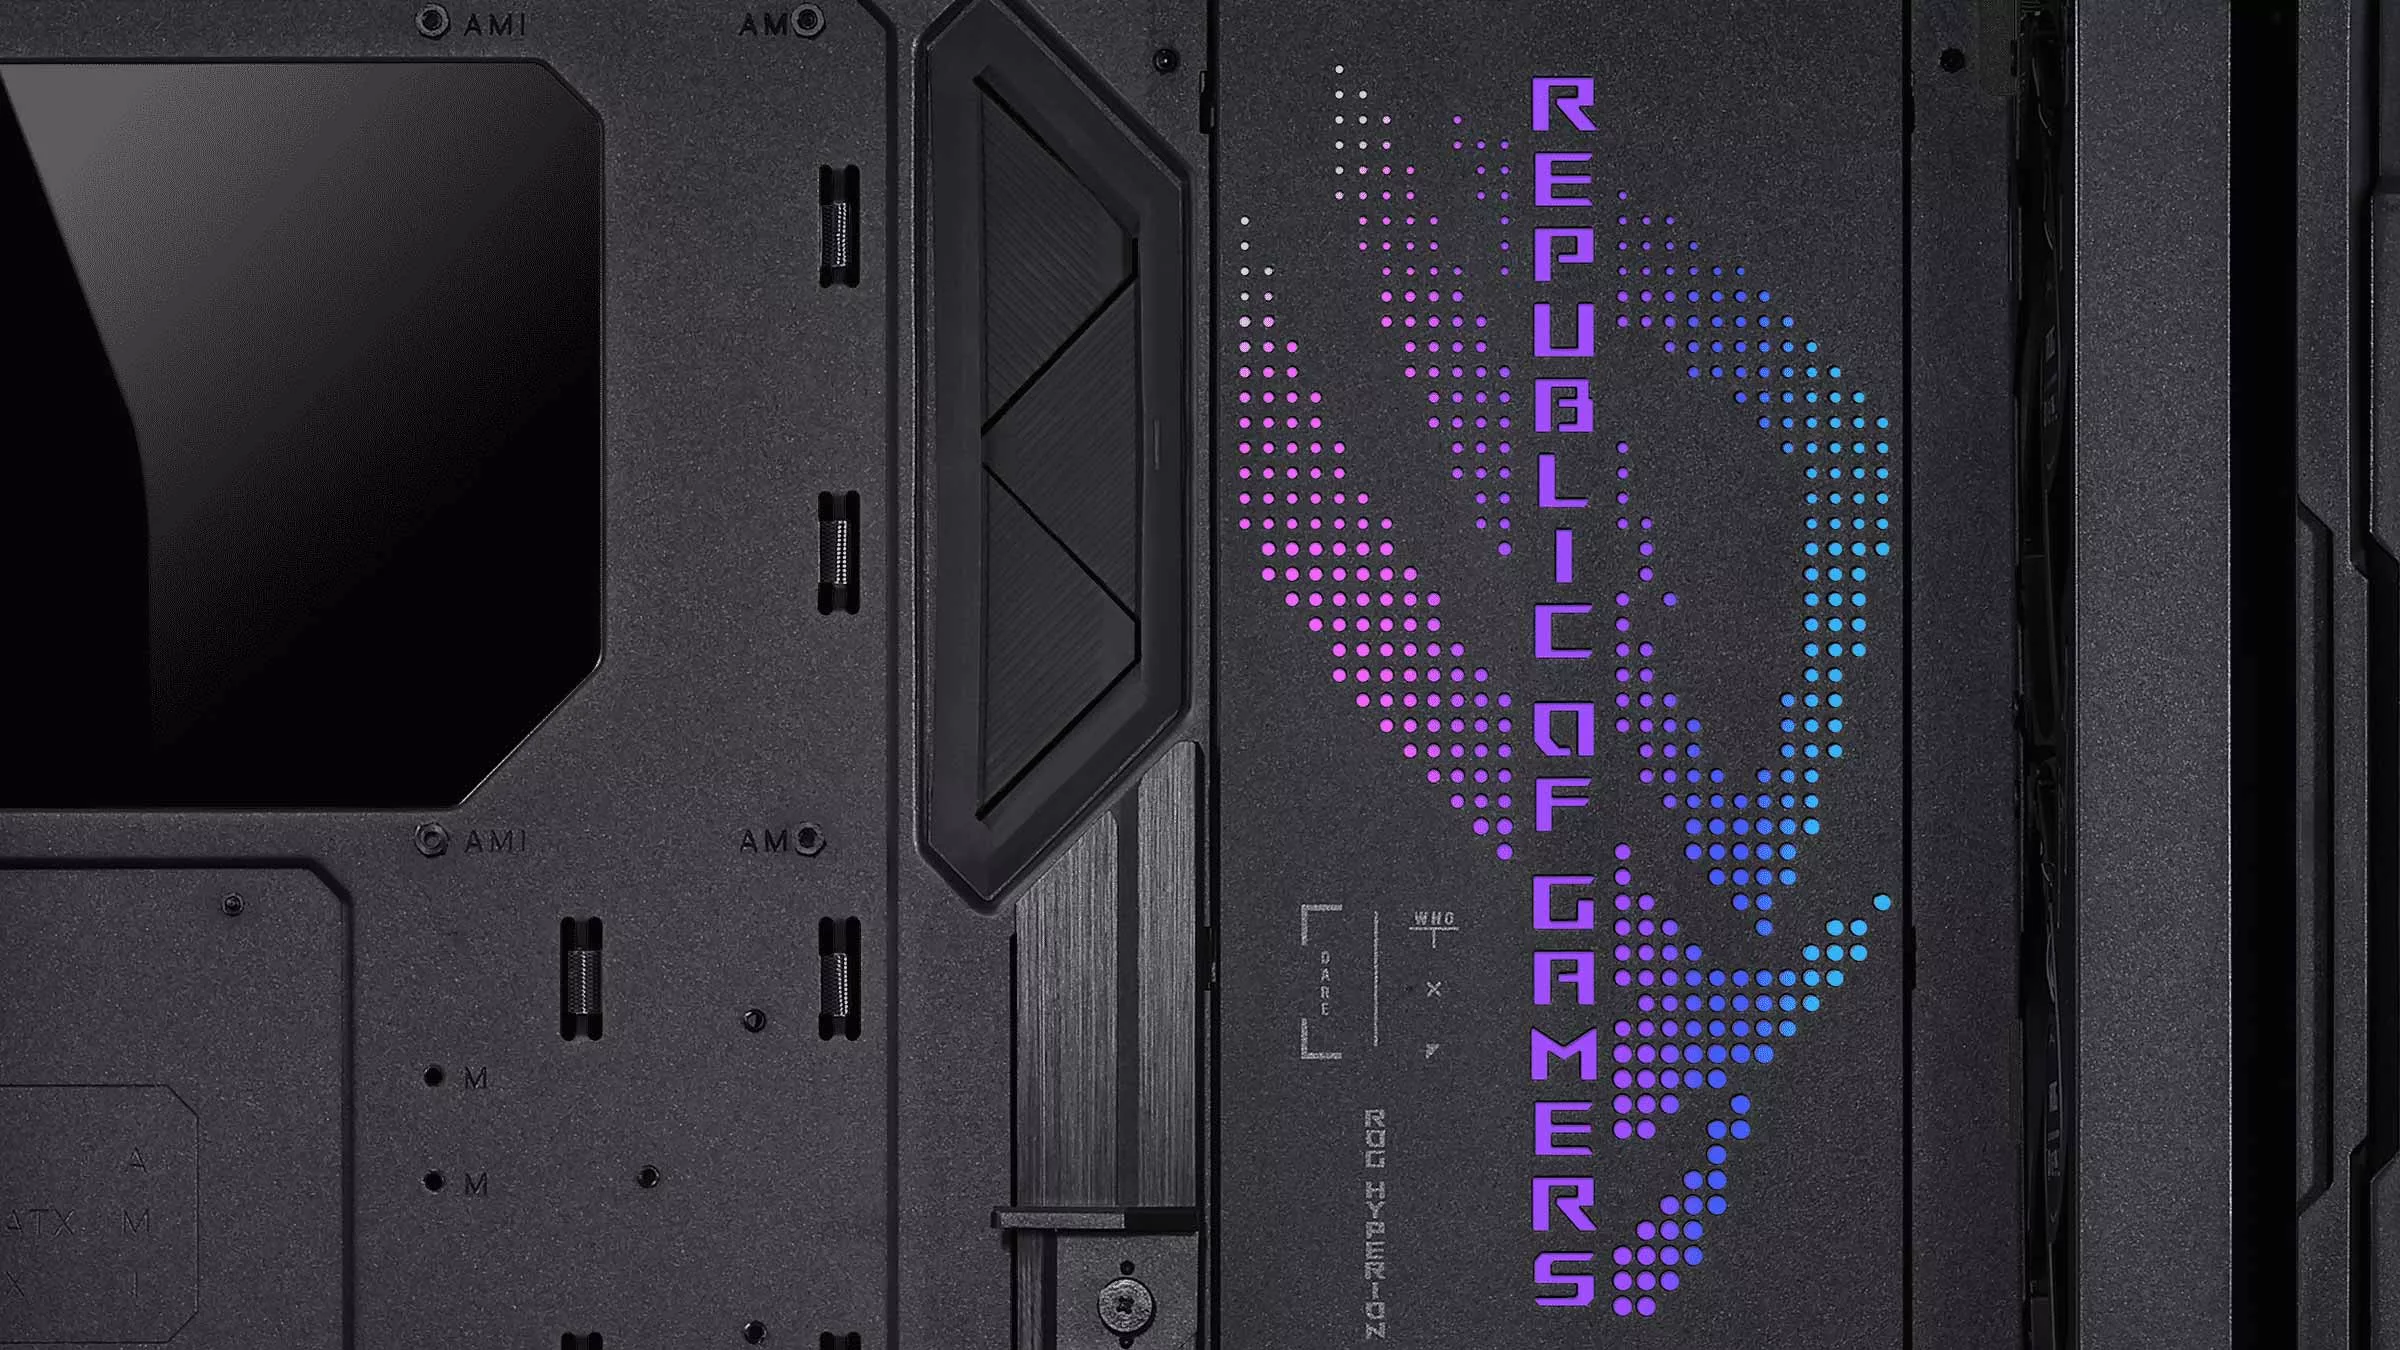 The inside of the ROG Hyperion case, showcasing the blue and purple ROG logo inside the case.